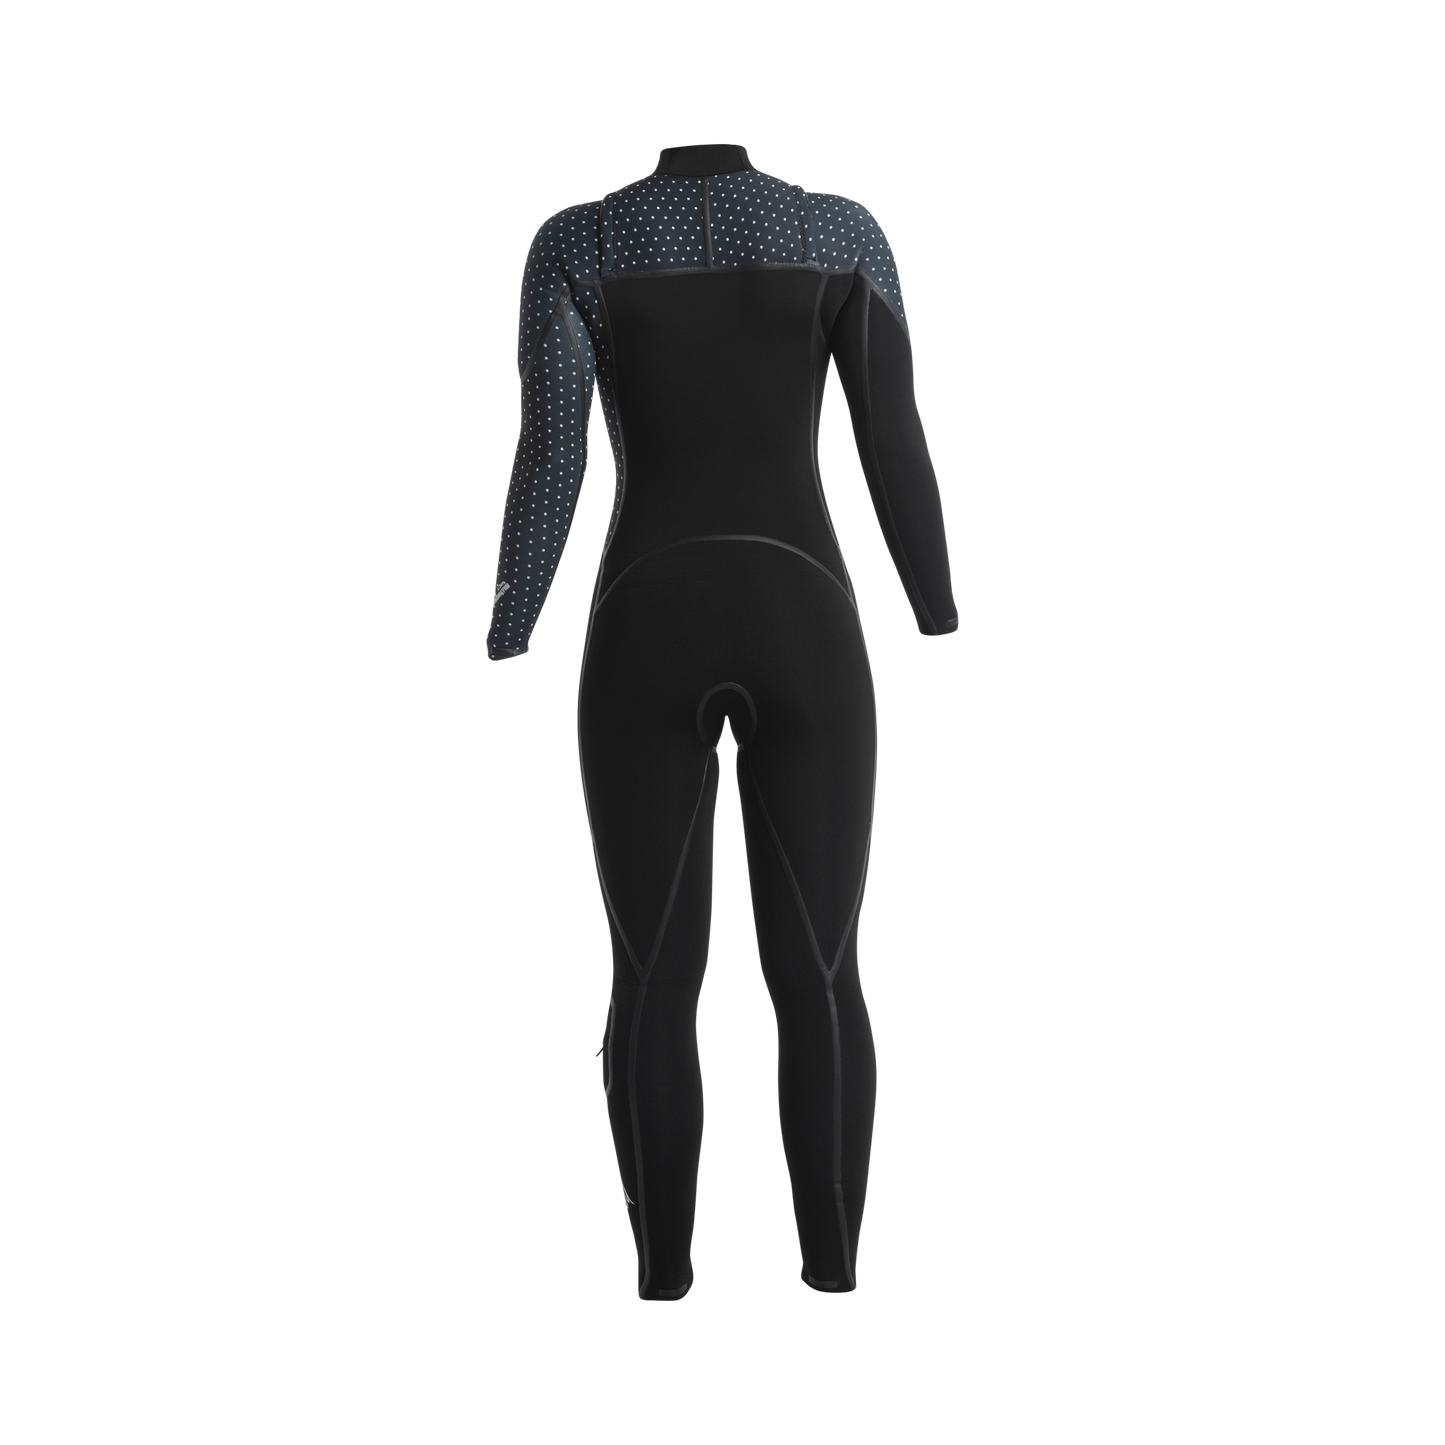 Buell RB1 Accelerator 4/3 women's wetsuit